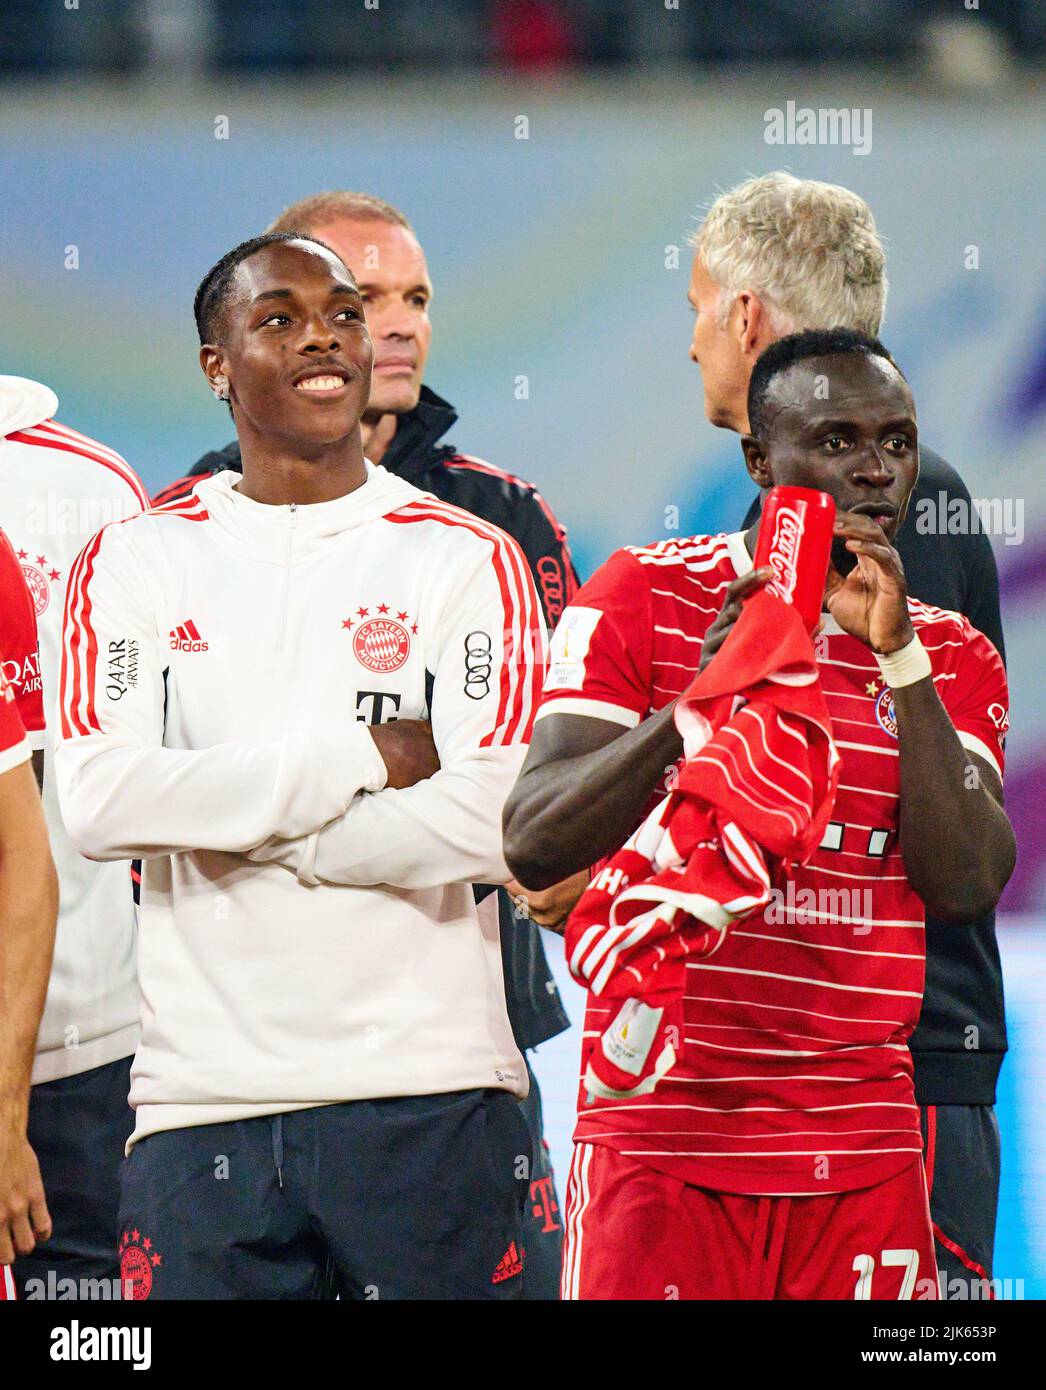 Leipzig, Germany. 30th July, 2022. Sadio Mane (FCB 17)  Mathys Tel, FCB 39    at winner ceremony with team mates after the match RB LEIPZIG - FC BAYERN MÜNCHEN 3-5 DFL SUPERCUP, 1. German Football League,  in Leipzig, July 30, 2022  Season 2022/2023 © Peter Schatz / Alamy Live News Credit: Peter Schatz/Alamy Live News Stock Photo